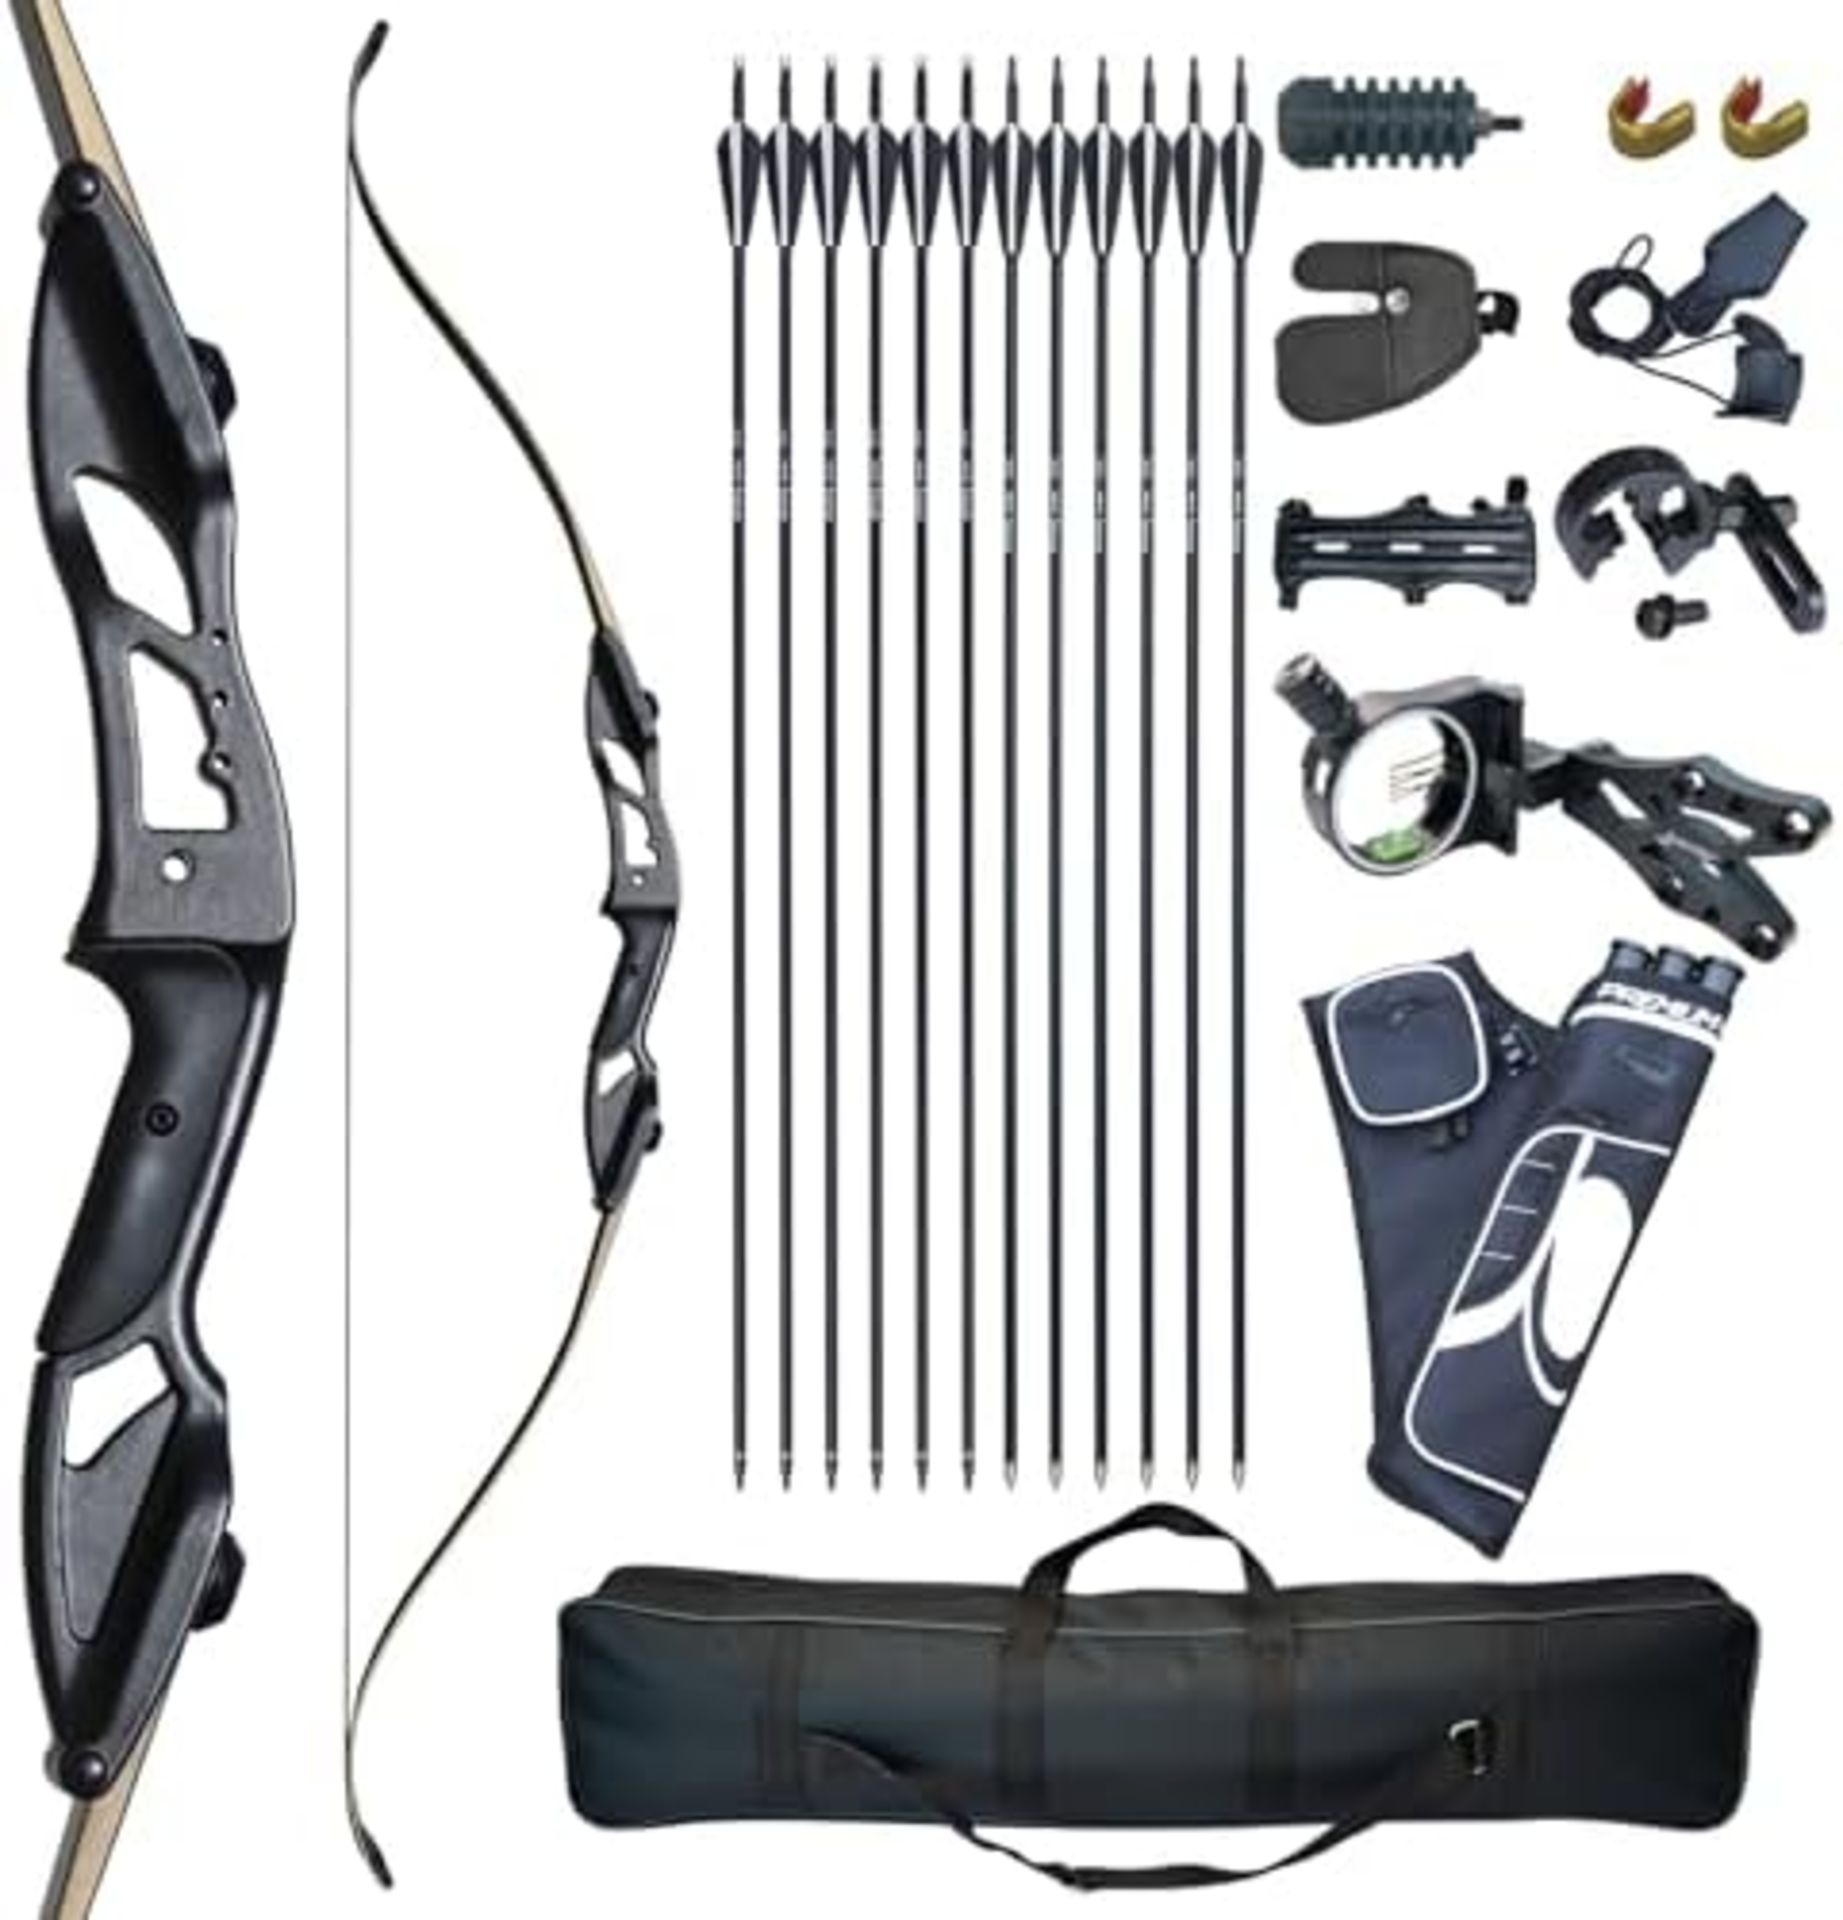 RRP £178.94 D&Q Recurve Bow and Arrow Set Adult Kit Archery Hunting